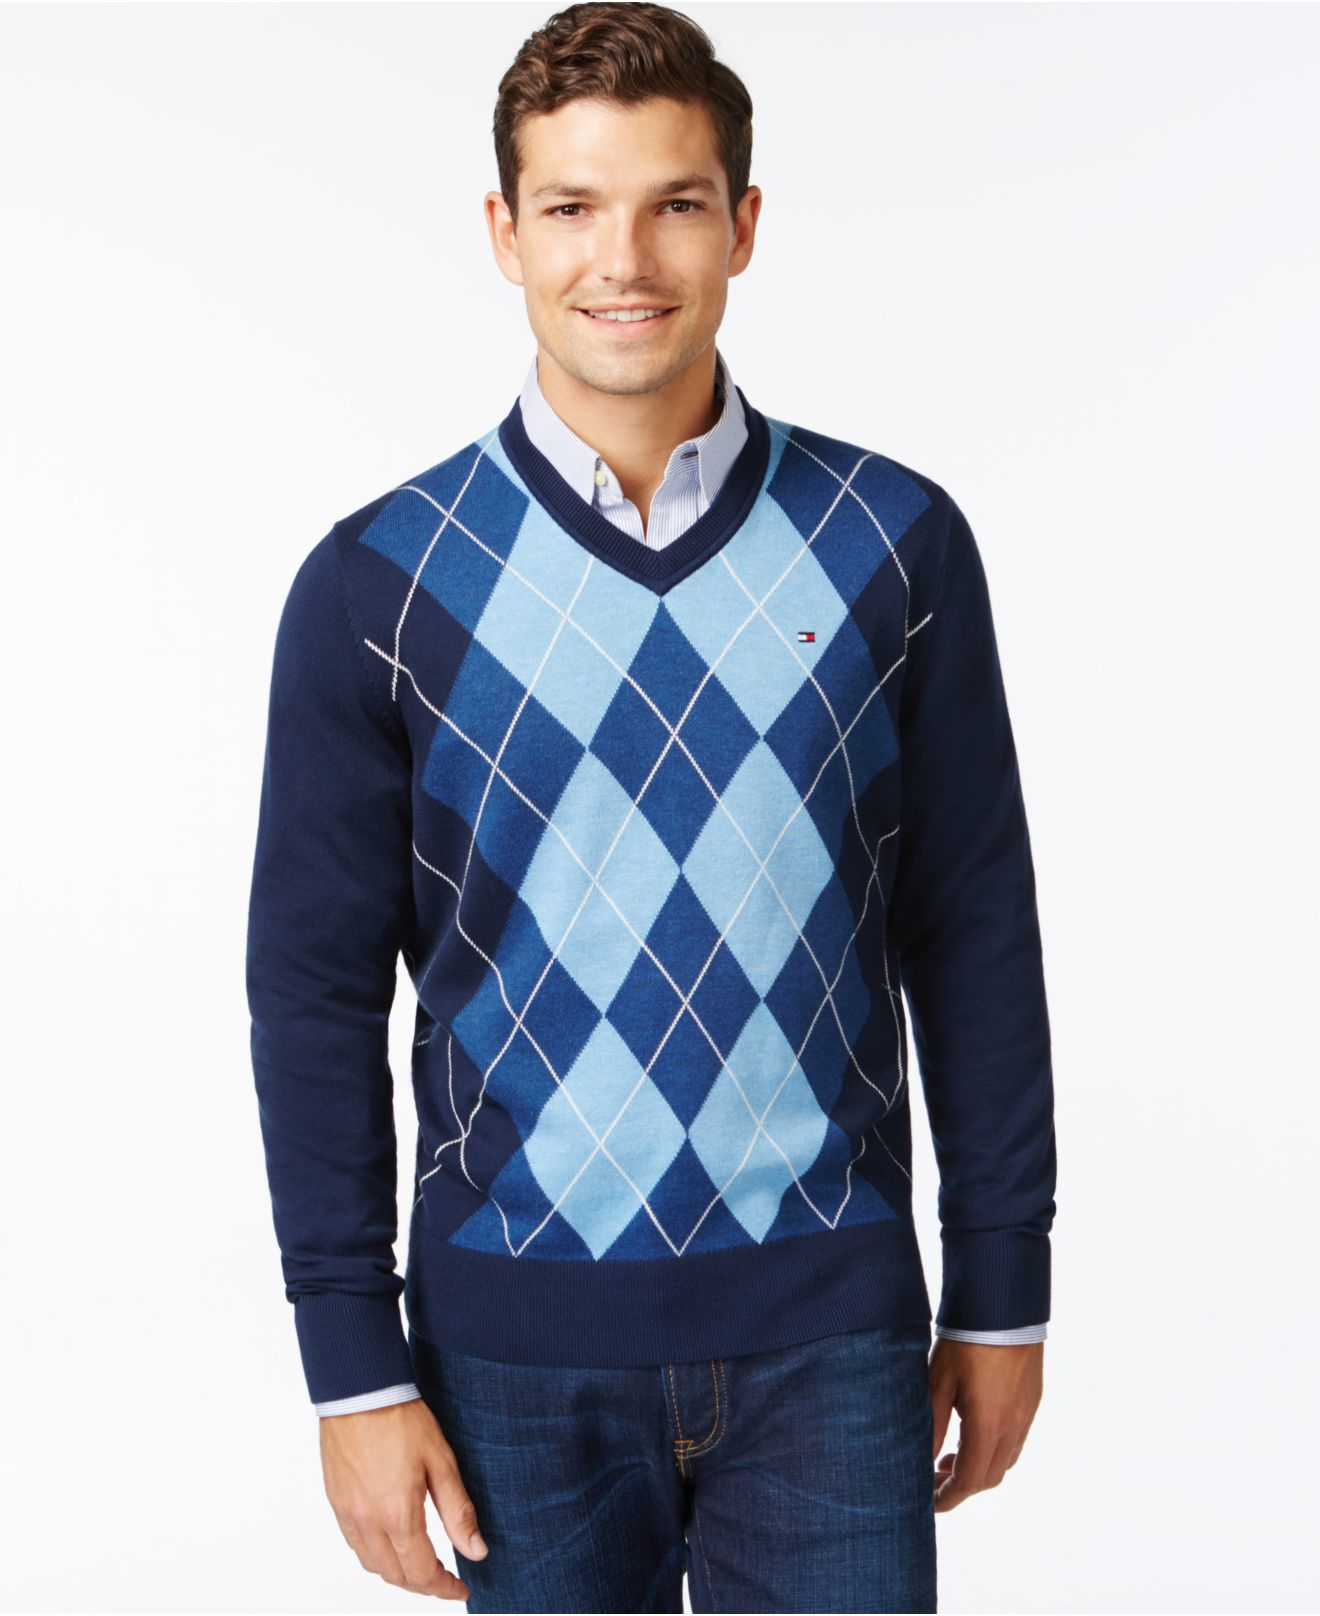 Tommy Hilfiger Signature Argyle Sweater in Blue for Men - Lyst